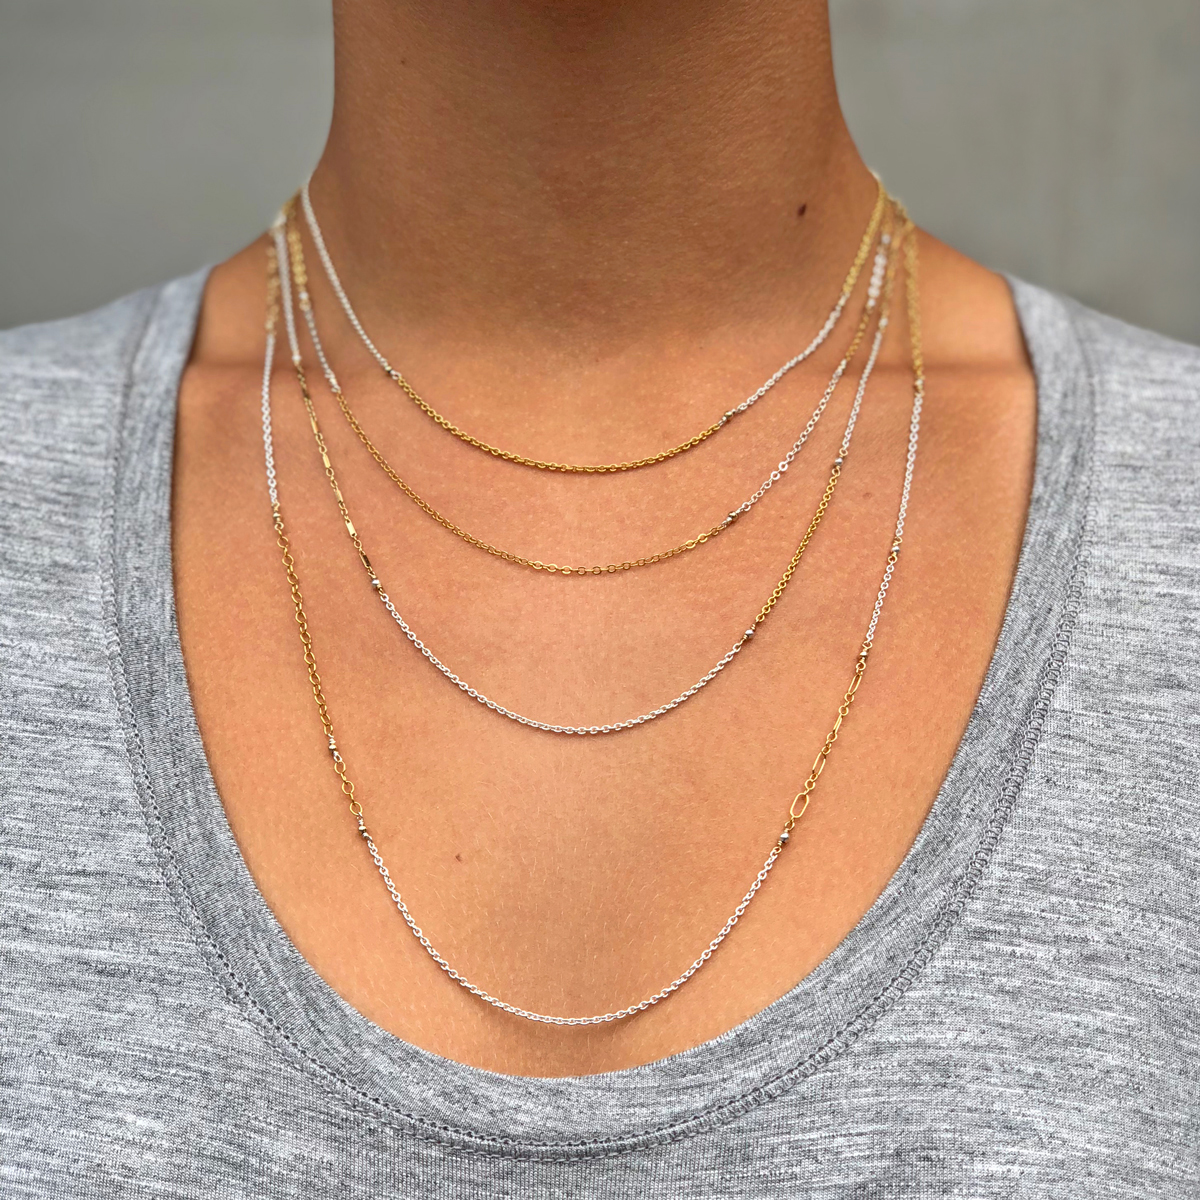 Mix-And-Match Metals: 10 Ways To Wear Both Gold And Silver - Society19 |  Mixed metals jewelry style, Mixed metal jewelry, Beaded jewelry necklaces